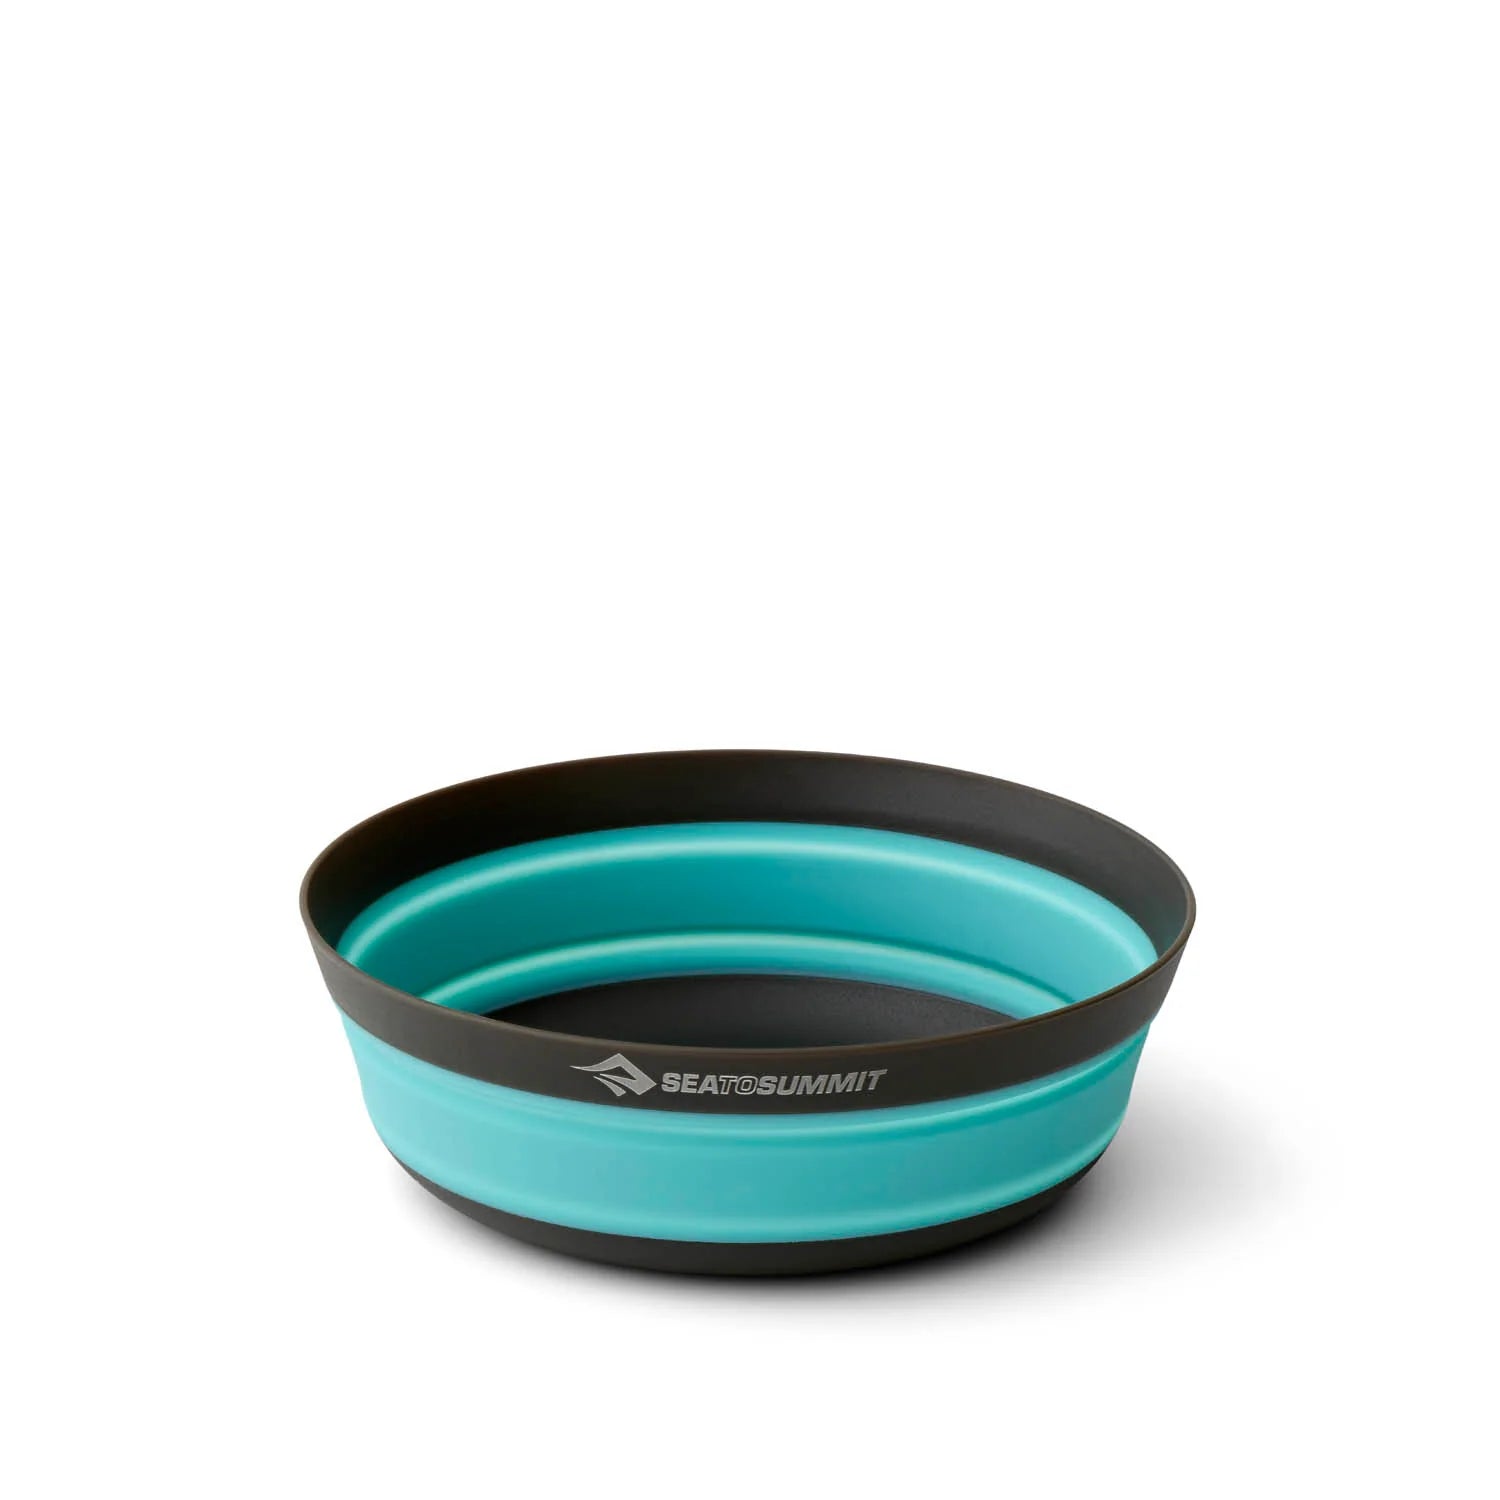 Sea to Summit Frontier UL Collapsible Bowl - Medium - BLUE - Mansfield Hunting & Fishing - Products to prepare for Corona Virus